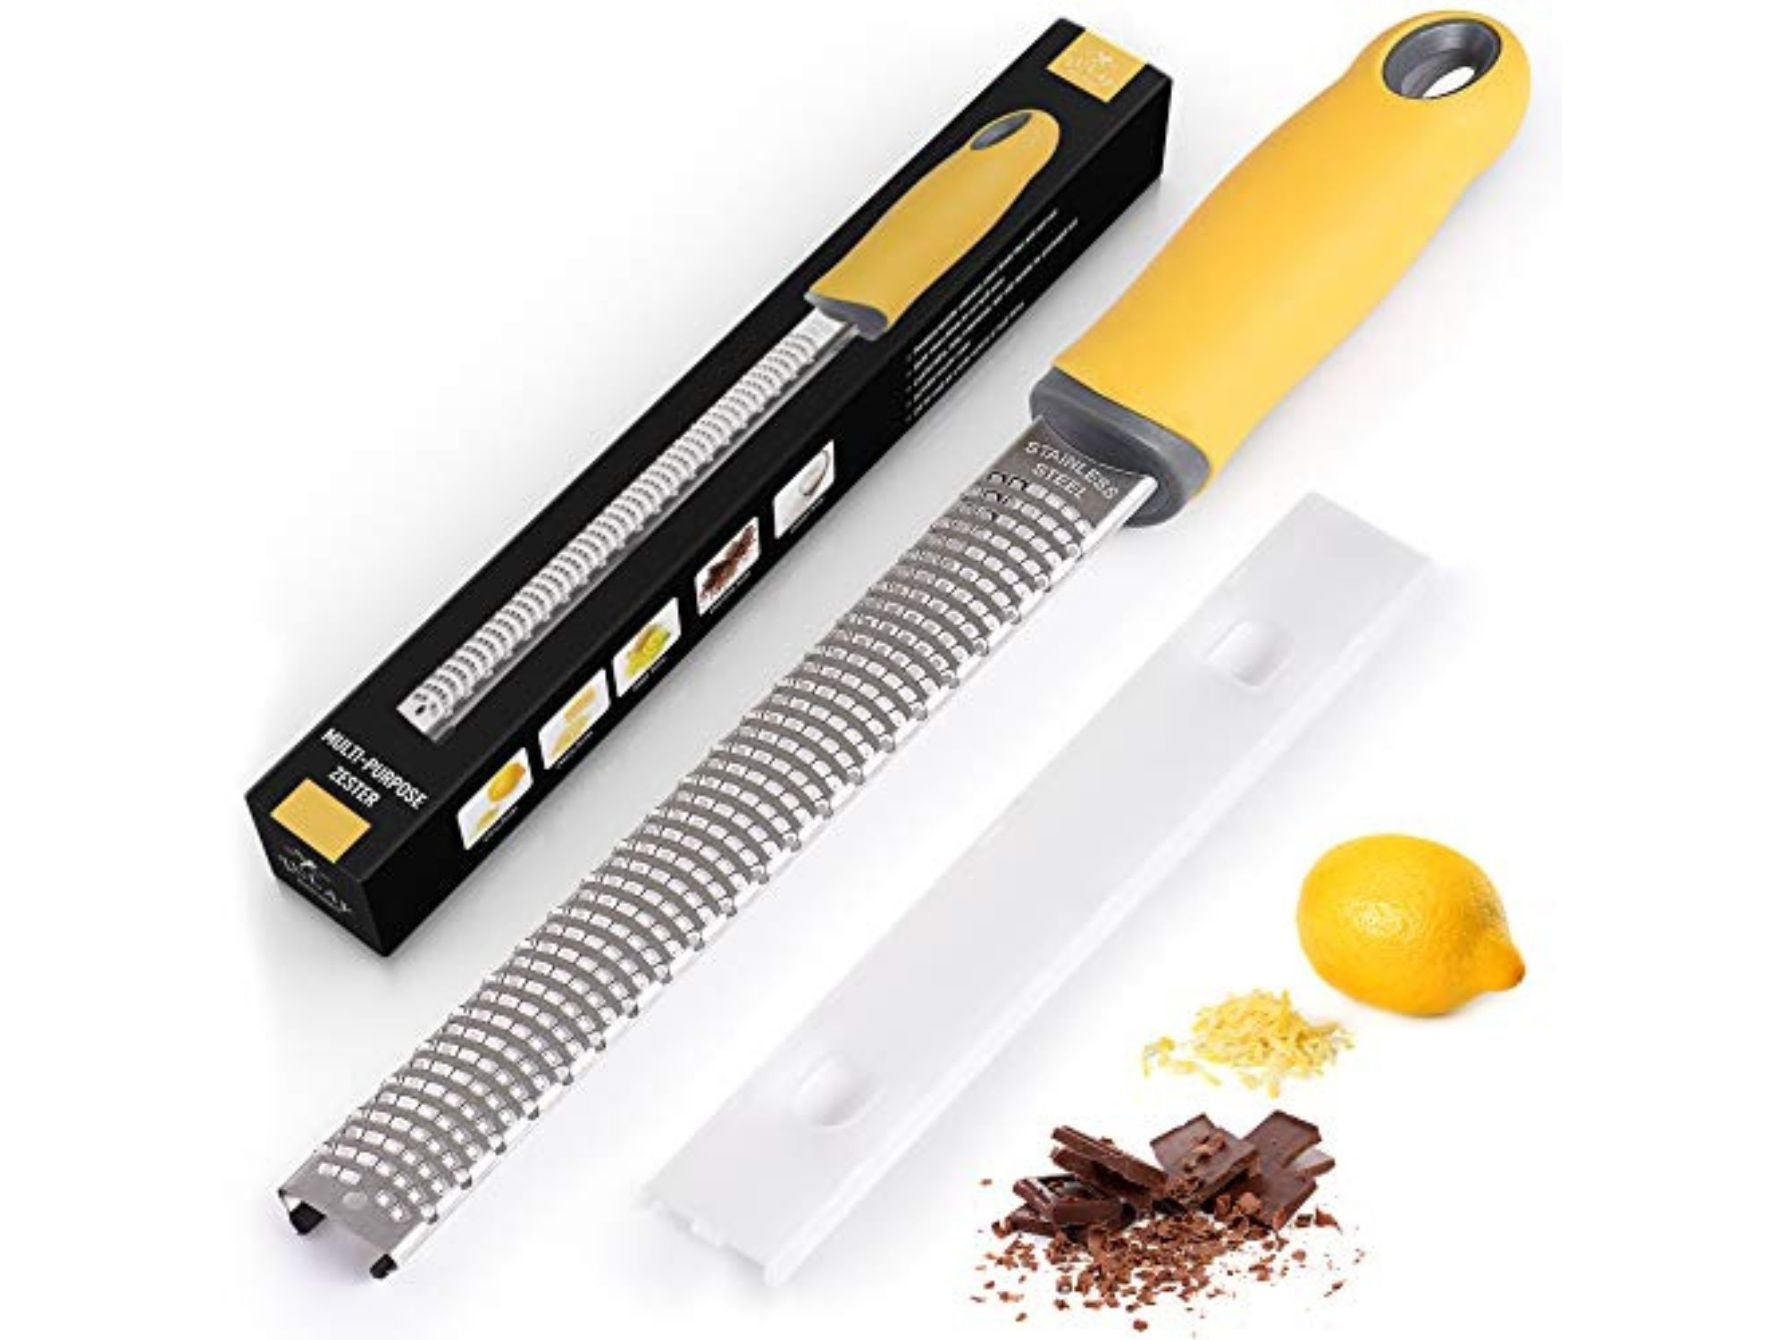 Stainless Steel Cheese Grater & Citrus Zester